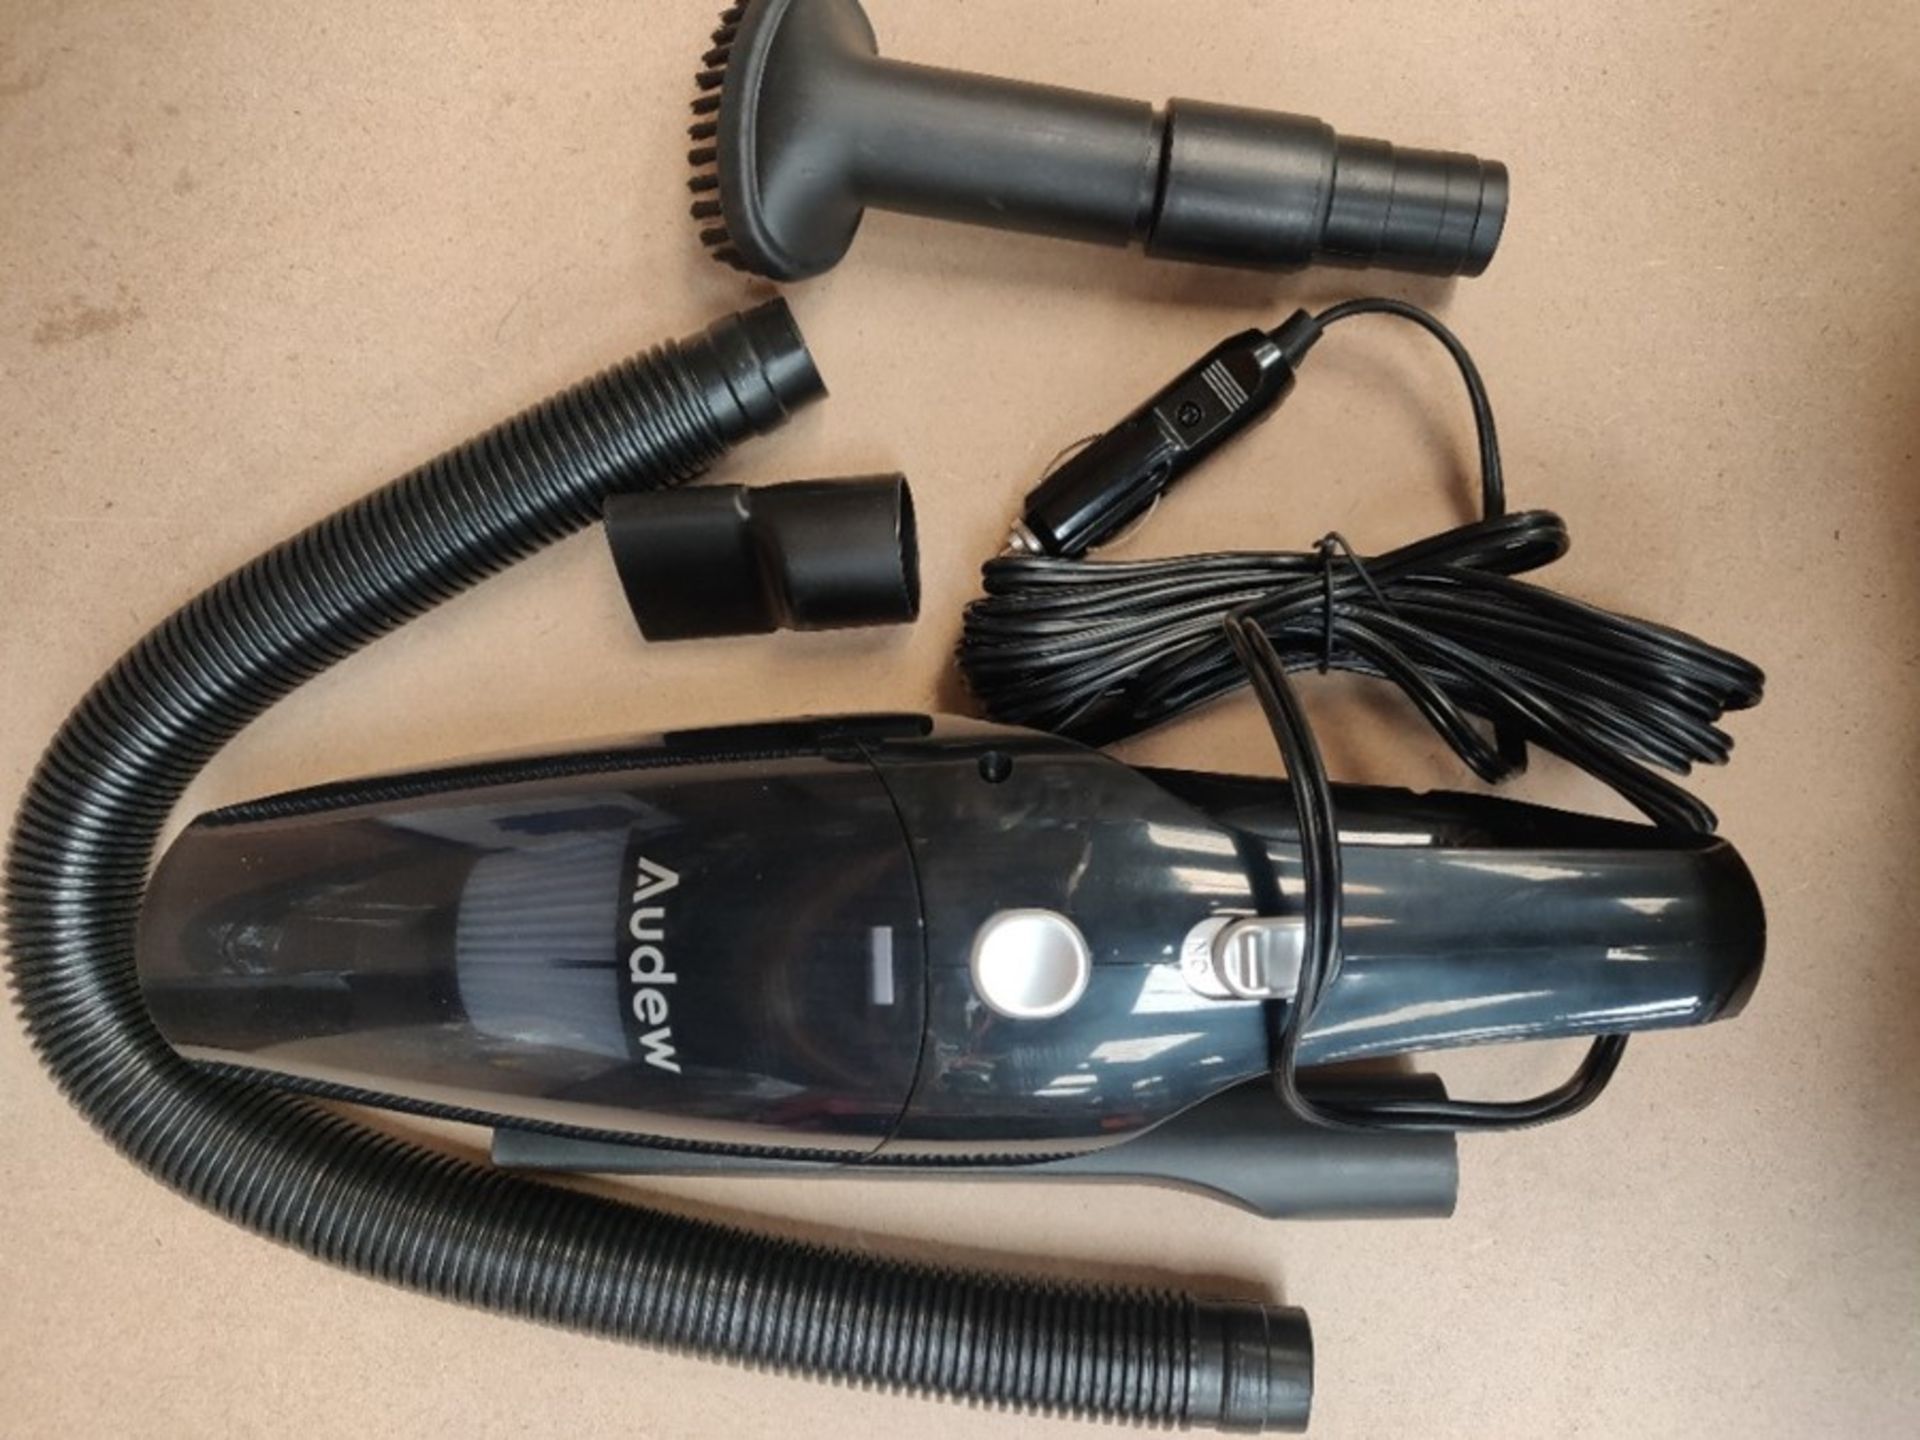 Audew Upgraded Car Vacuum Cleaner 8000Pa Powerful Suction Car Hoover DC 12V Portable H - Image 3 of 3